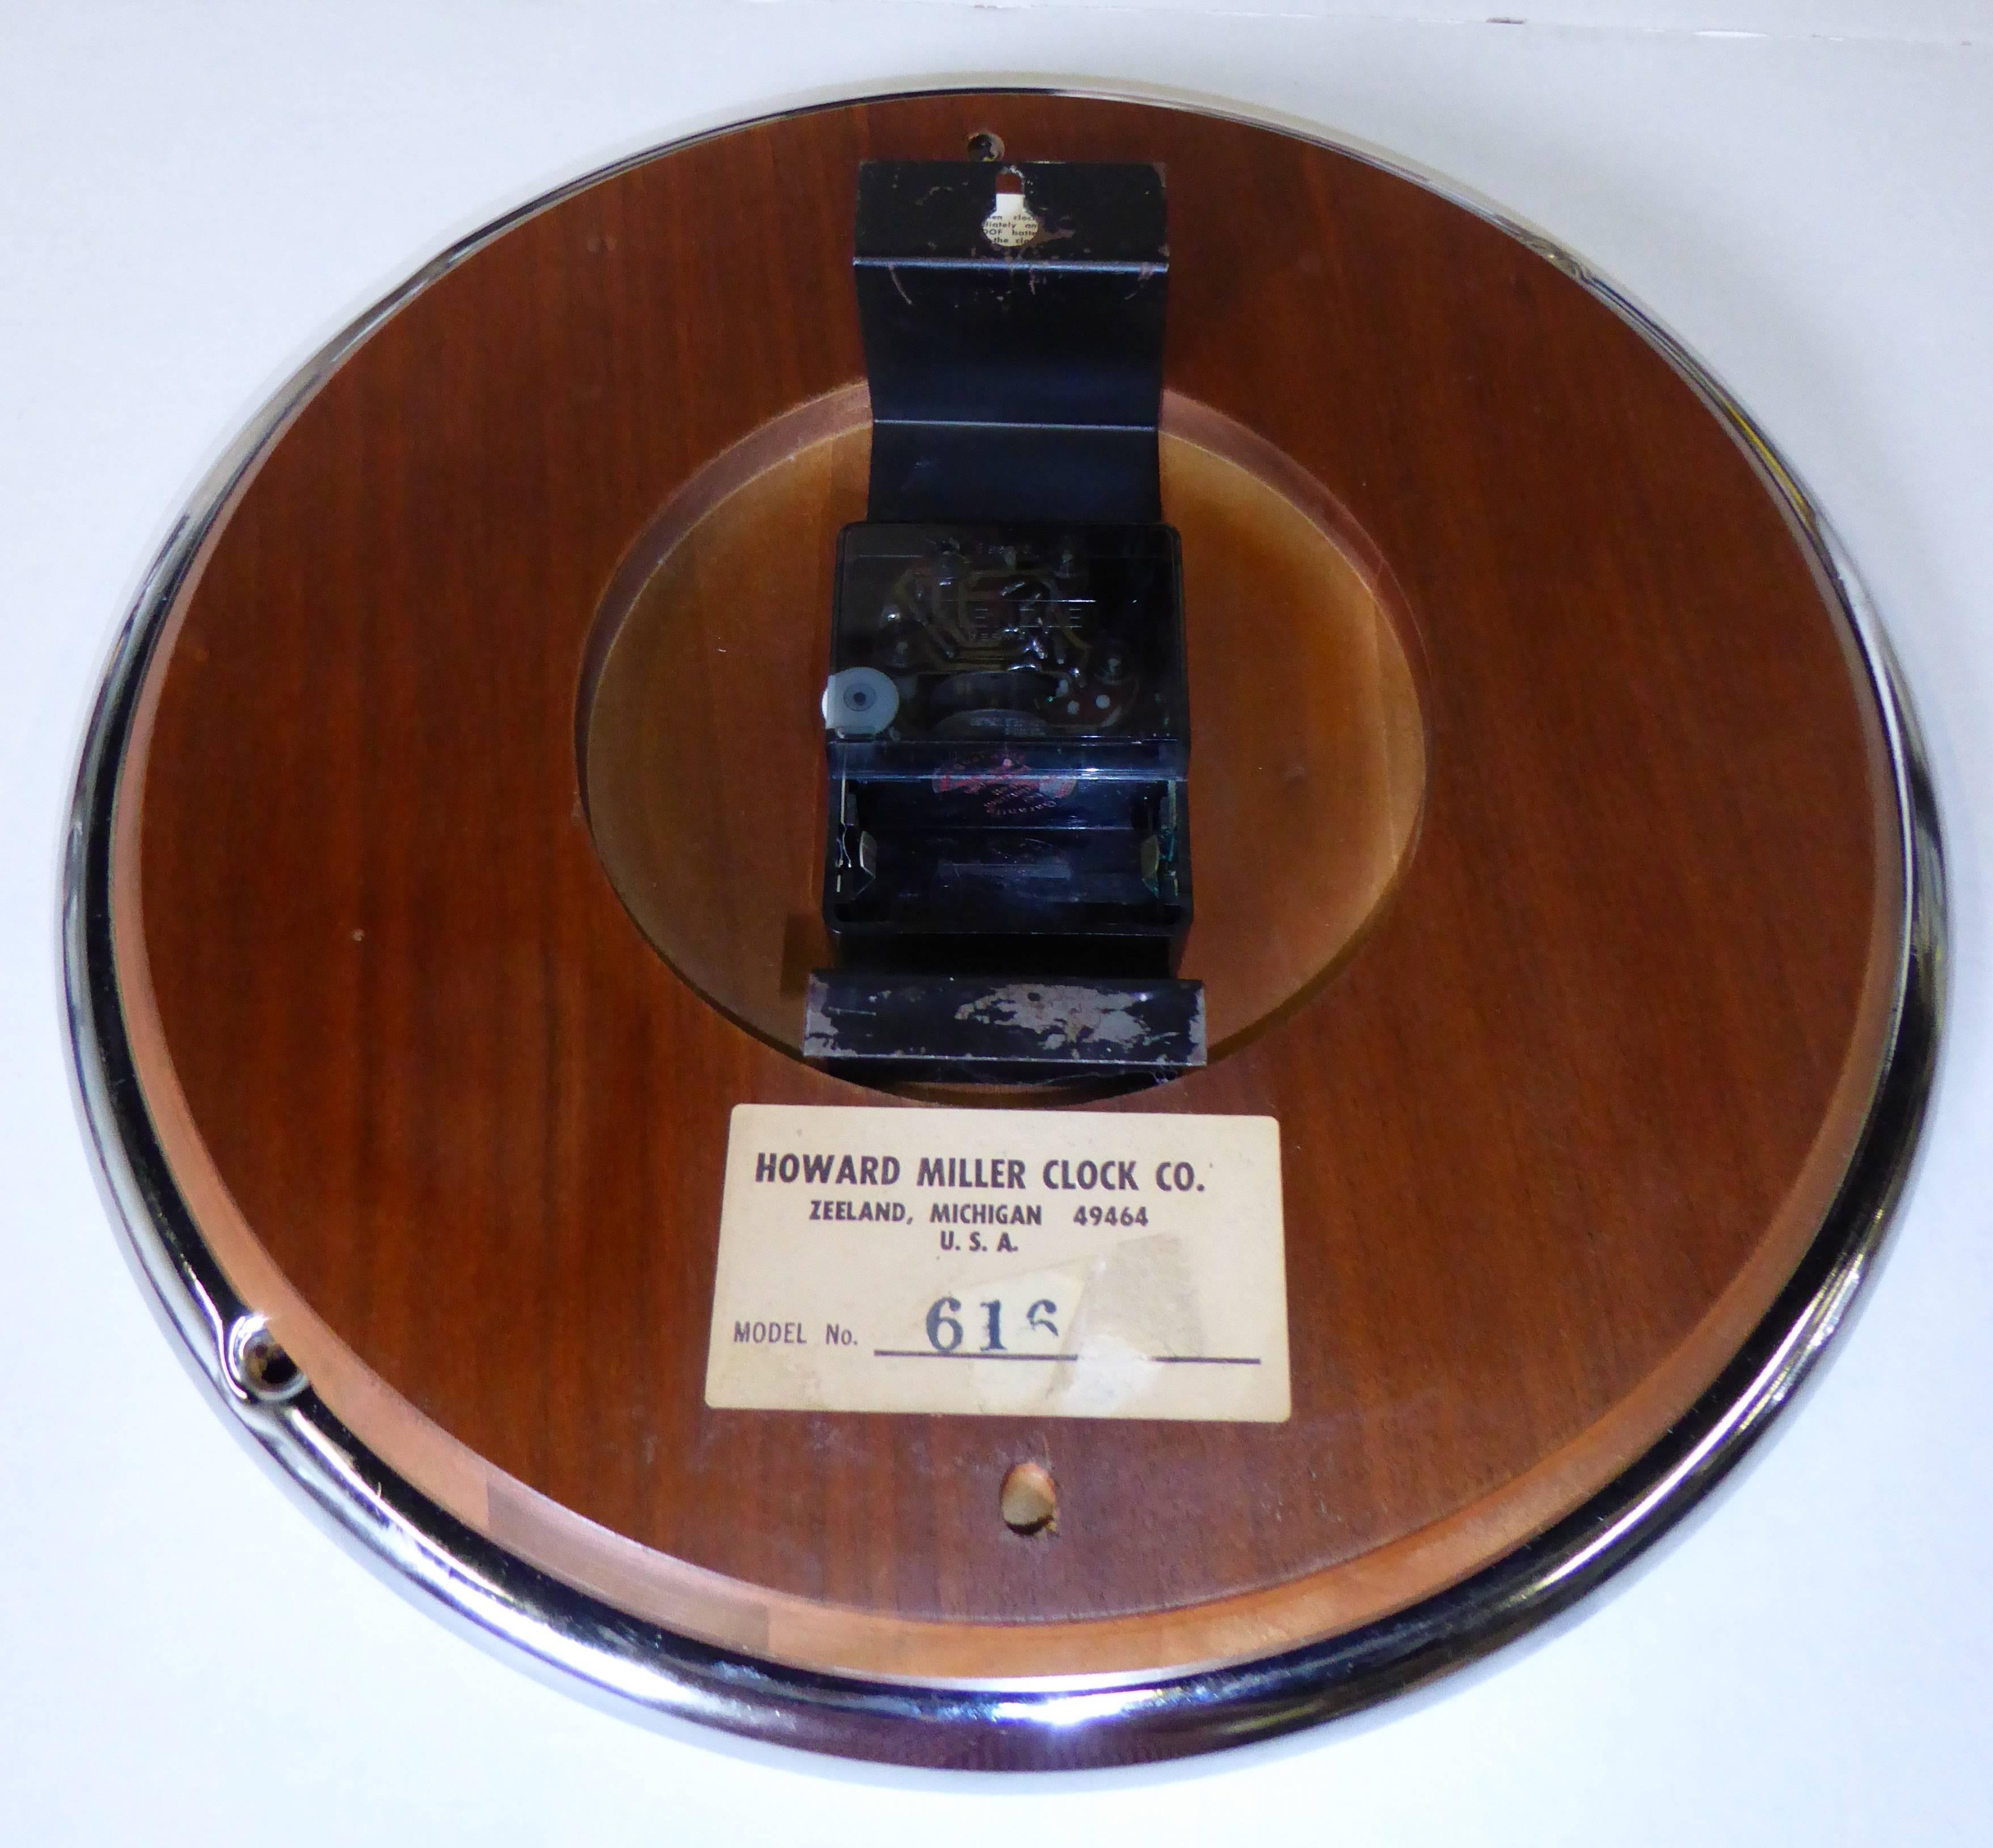 REDUCED FROM $995....Beautiful Howard Miller clock in chrome and African zebrawood with a highly figured grain with George Nelson hands, this clock matches the Peter Protzman desk and credenzas by Herman Miller produced only in 1970-1971. Clock